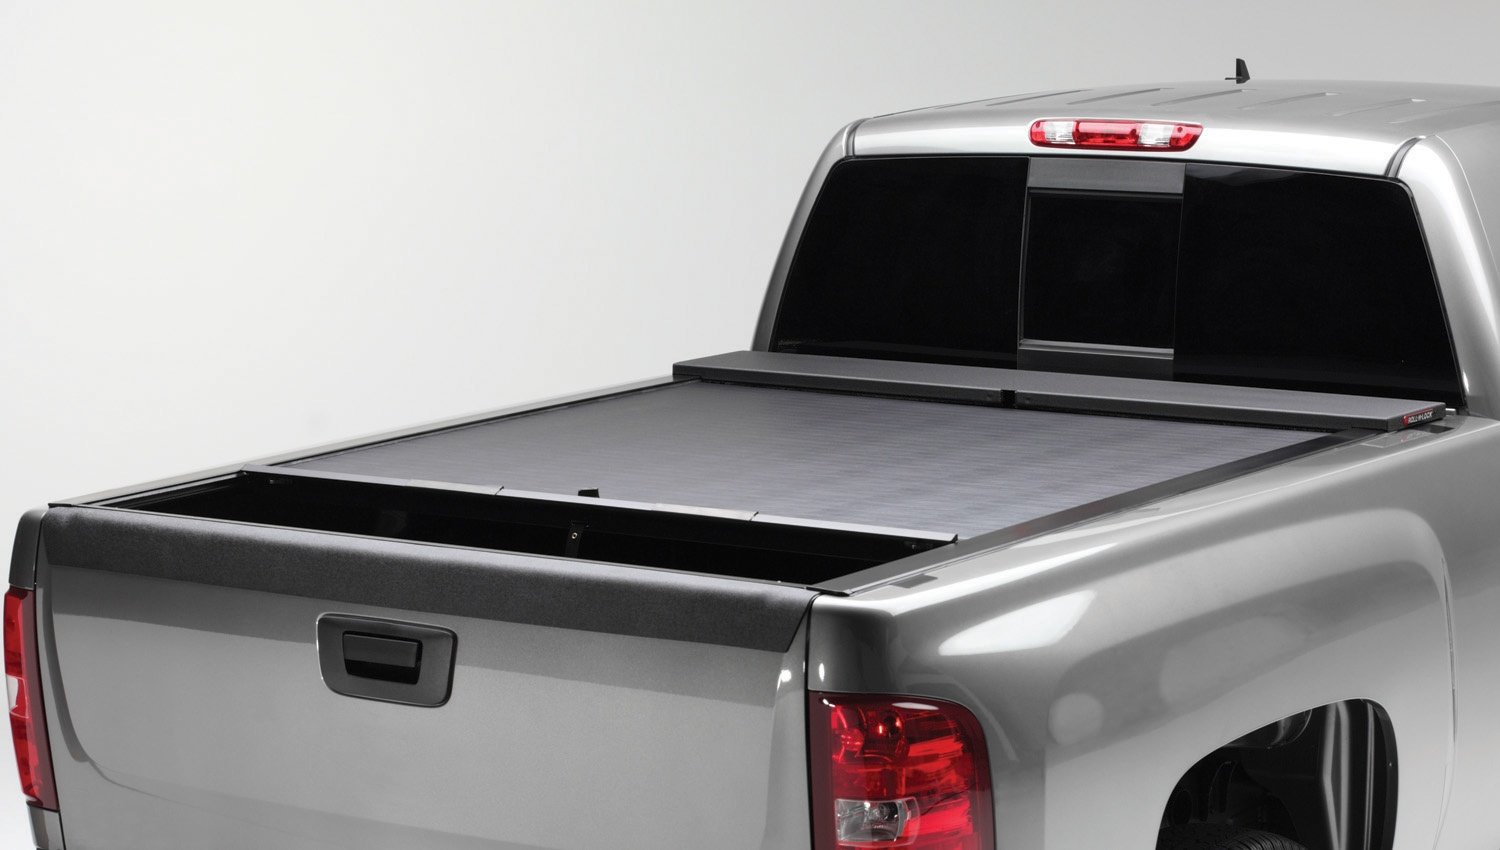 LG500M M-Series Locking Retractable Truck Bed Cover for 1995-2004 Tacoma Regular/Extended Cab [6 ft. Bed]